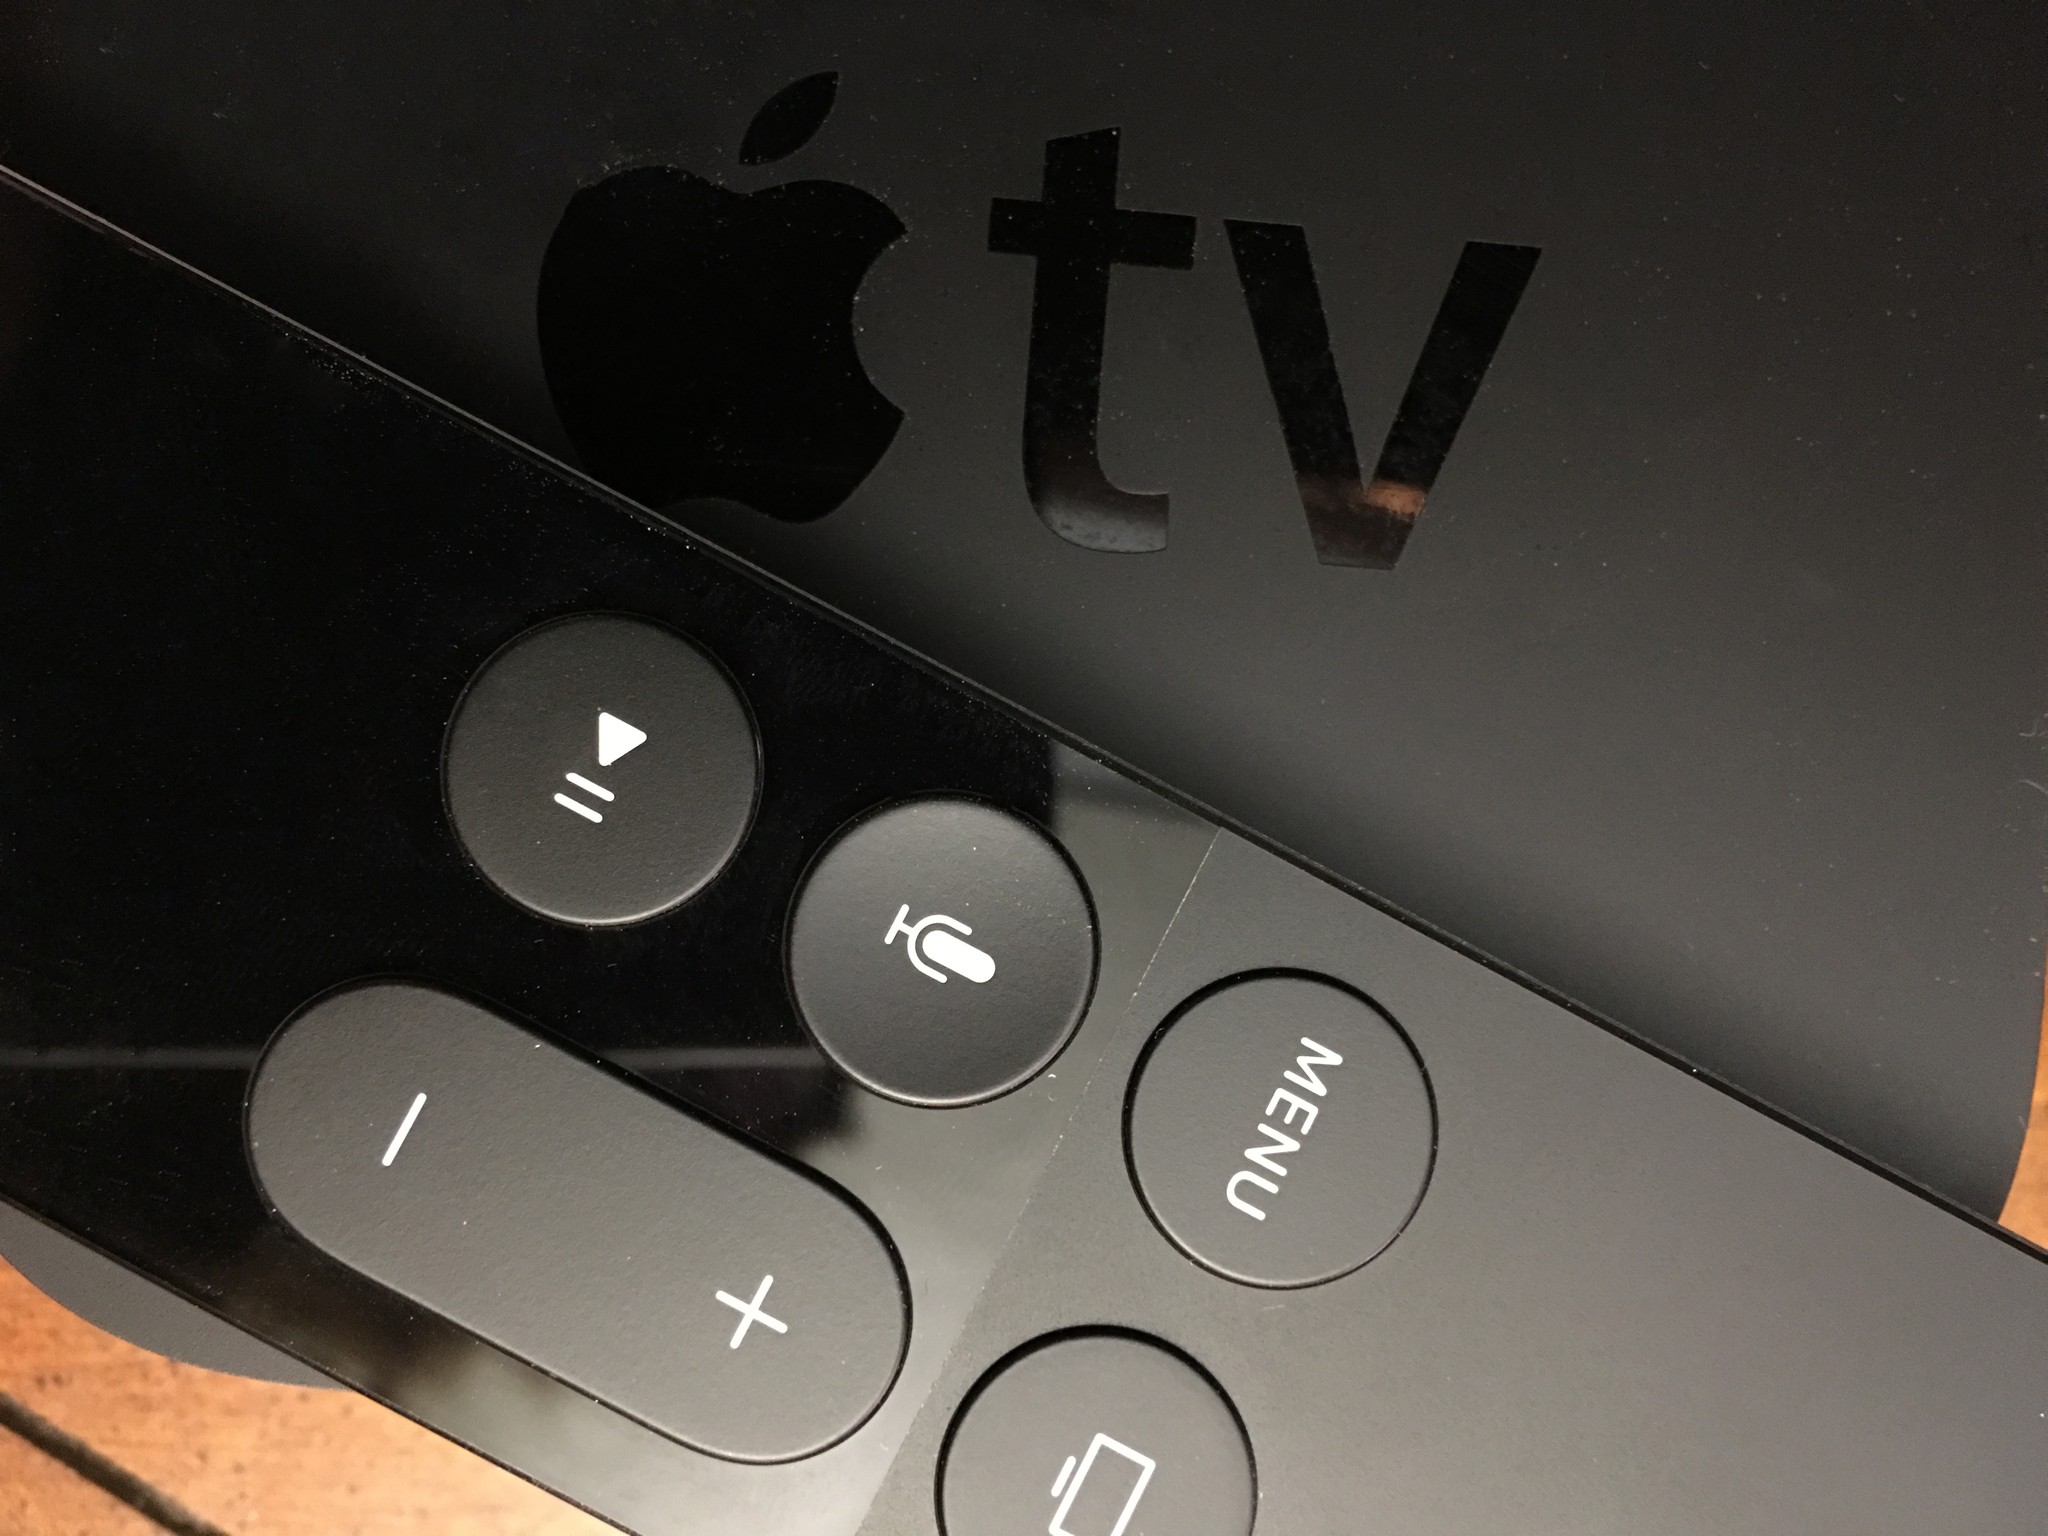 How to download tvOS 11 public beta 1 to your Apple TV